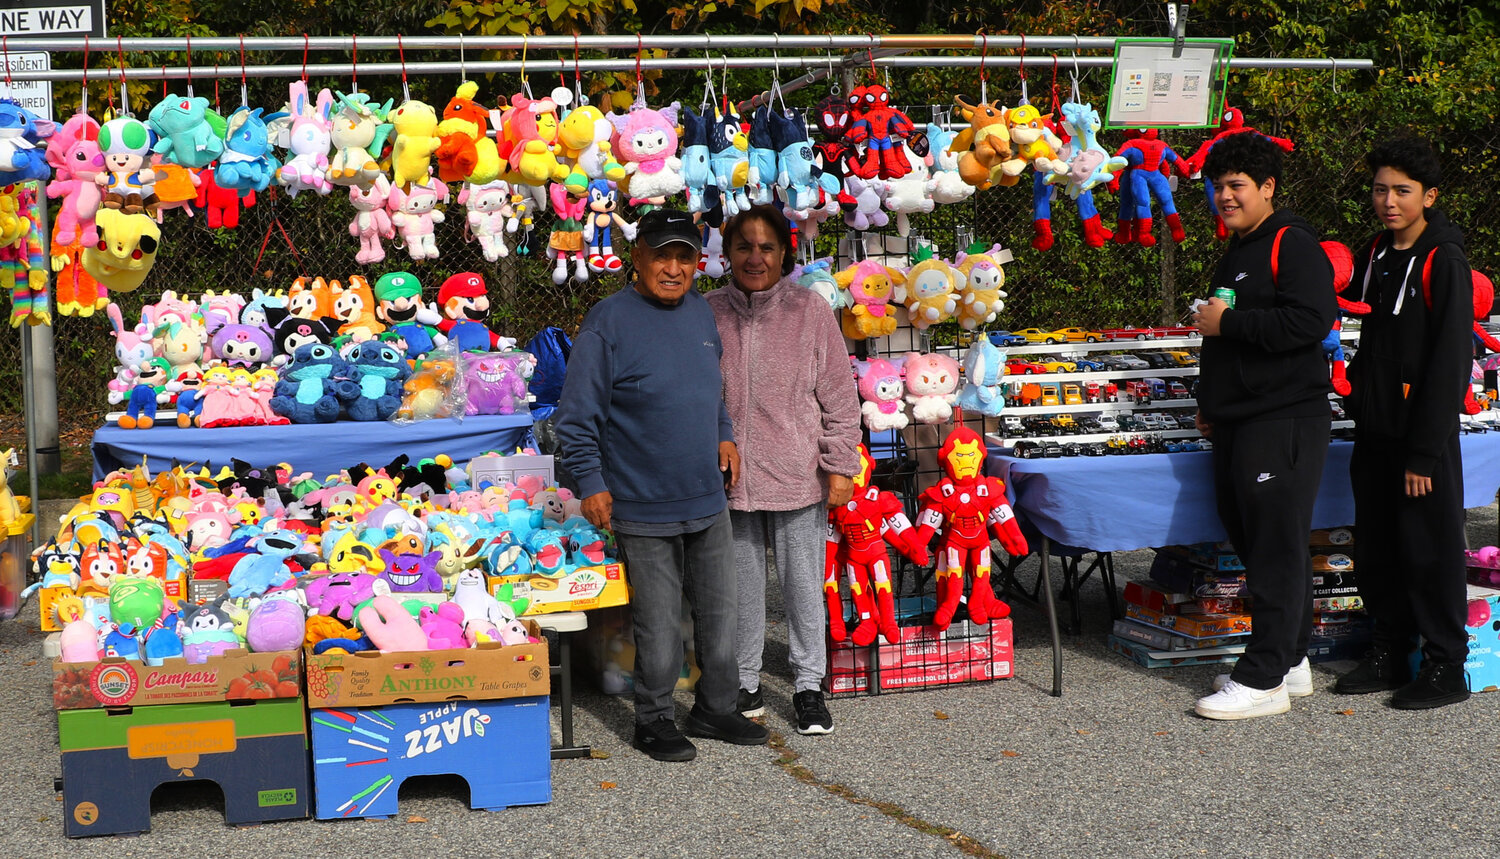 Rudy and Wilma Han from Lola & Toby Toys had many colorful toys for sale.  Carlos Bonilla and Rodrigo Galdamez were interested in the Spiderman items.